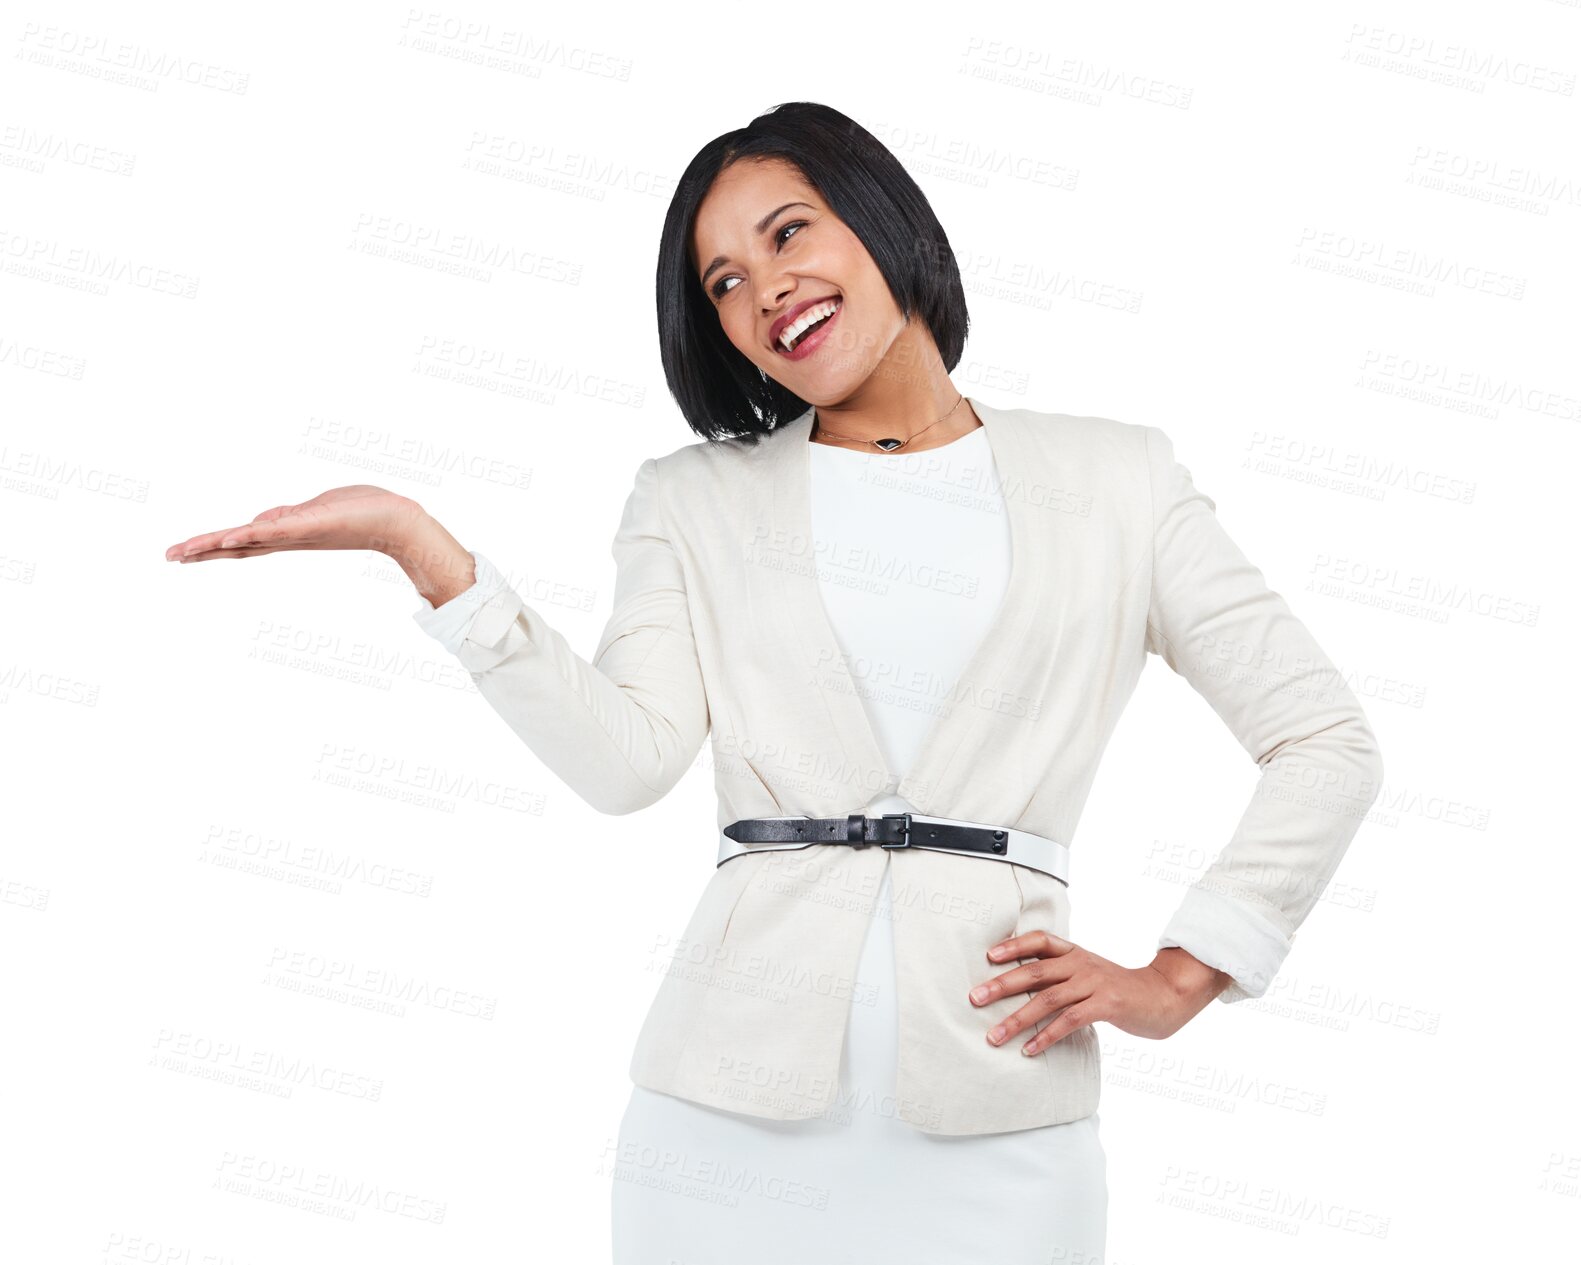 Buy stock photo Presentation, happy woman and palm gesture for business advertising info, brand logo or product sales launch. Branding, commercial and professional person isolated on a transparent, png background